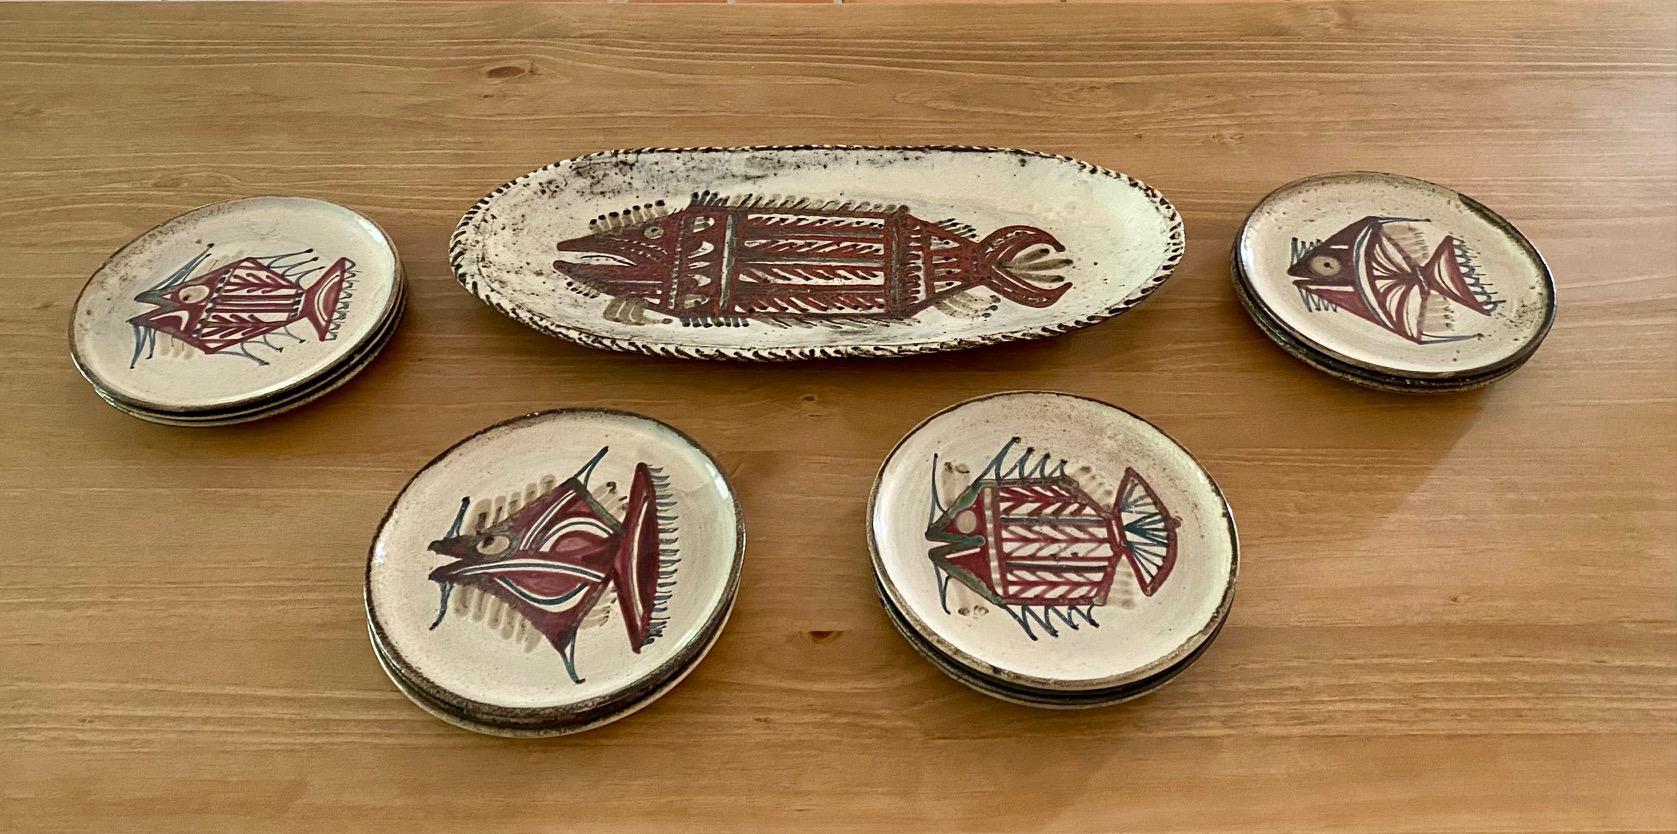 12 ceramic plates diameter : 24 cm
1 Large ceramic dish : 59 cm x 25 cm
All hand decorated with different stylized fishes by Gustave Reynaud / Atelier LE MURIER in Vallauris 1960's.
Very Nice condition.